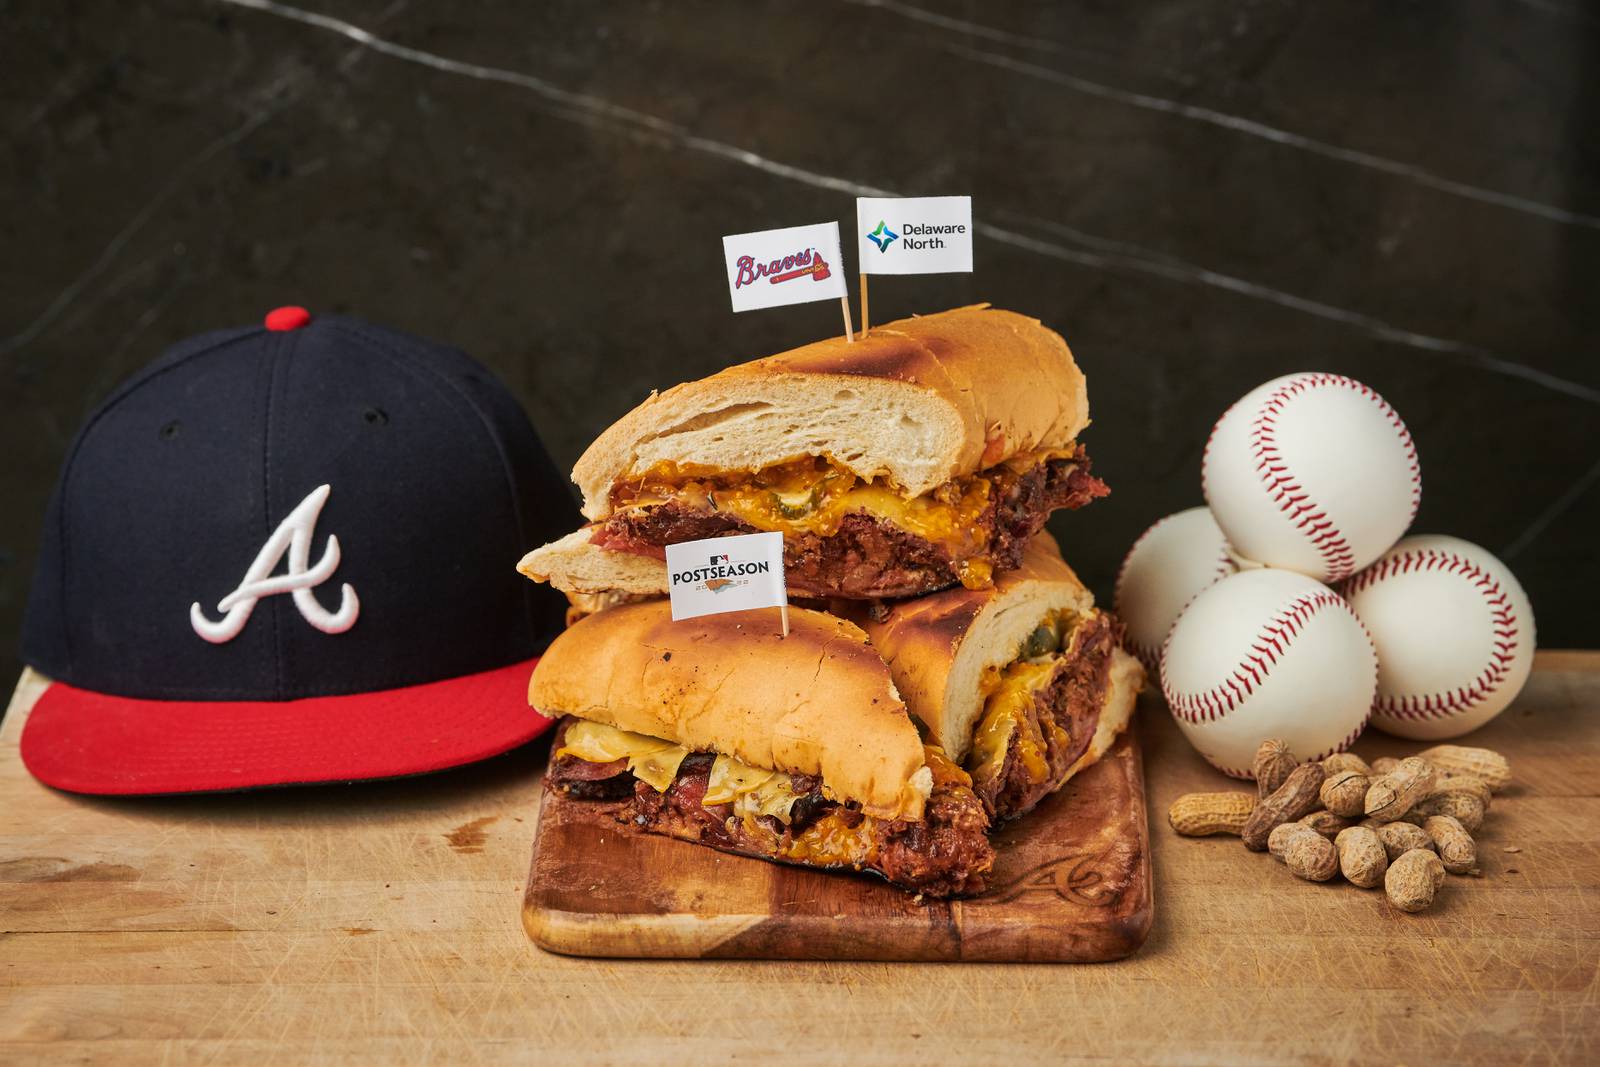 PHOTOS New food items unveiled for NLDS at Truist Park WSBTV